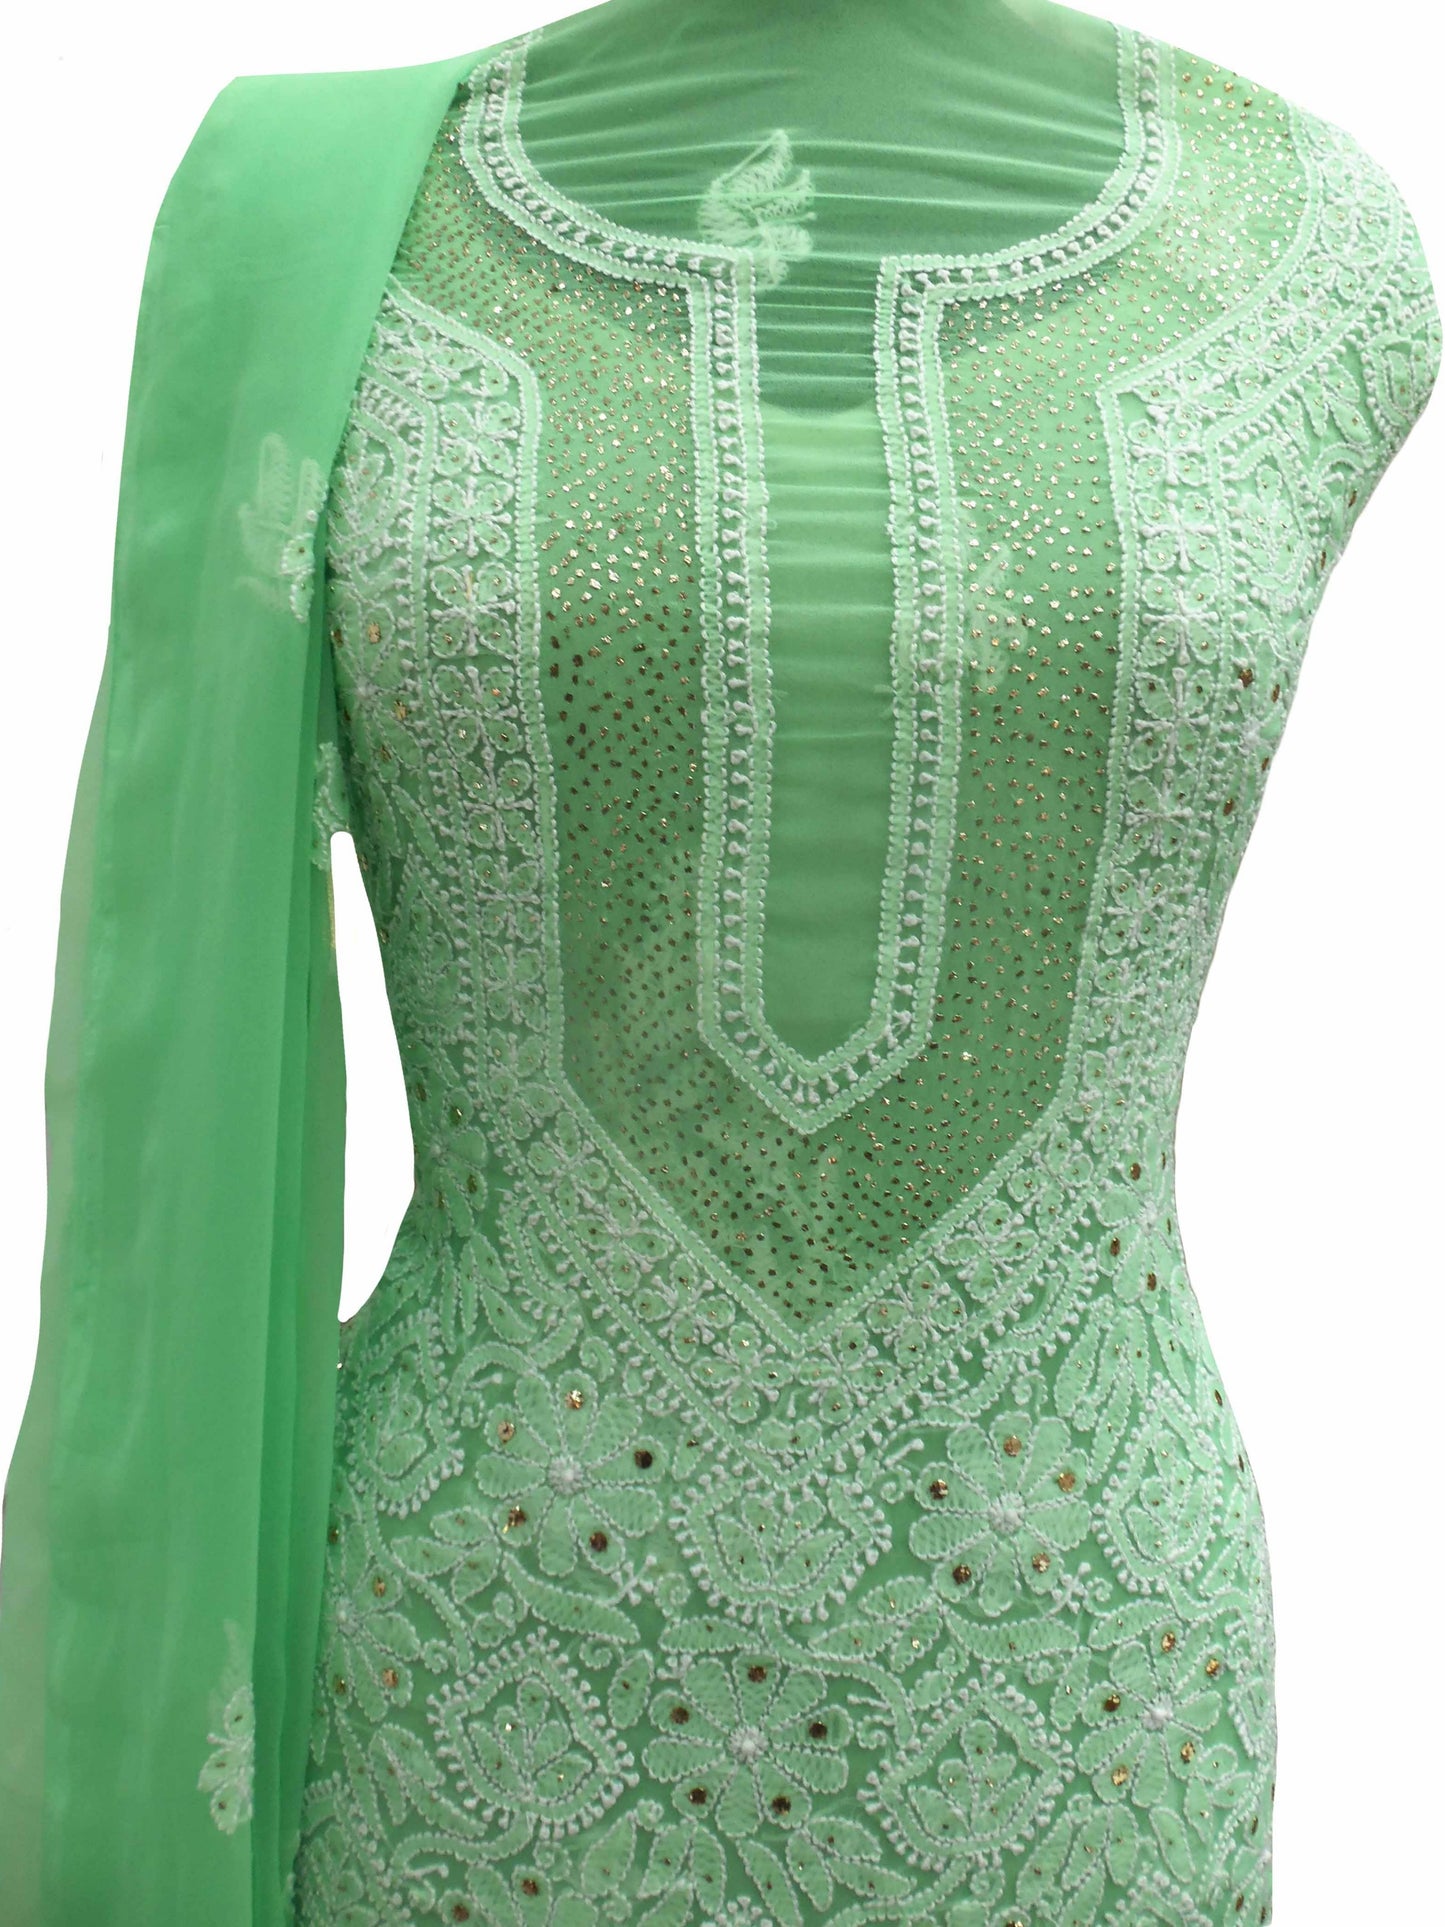 Shyamal Chikan Hand Embroidered Green Georgette Lucknowi Chikankari Unstitched Suit Piece With Mukaish Work - S5761